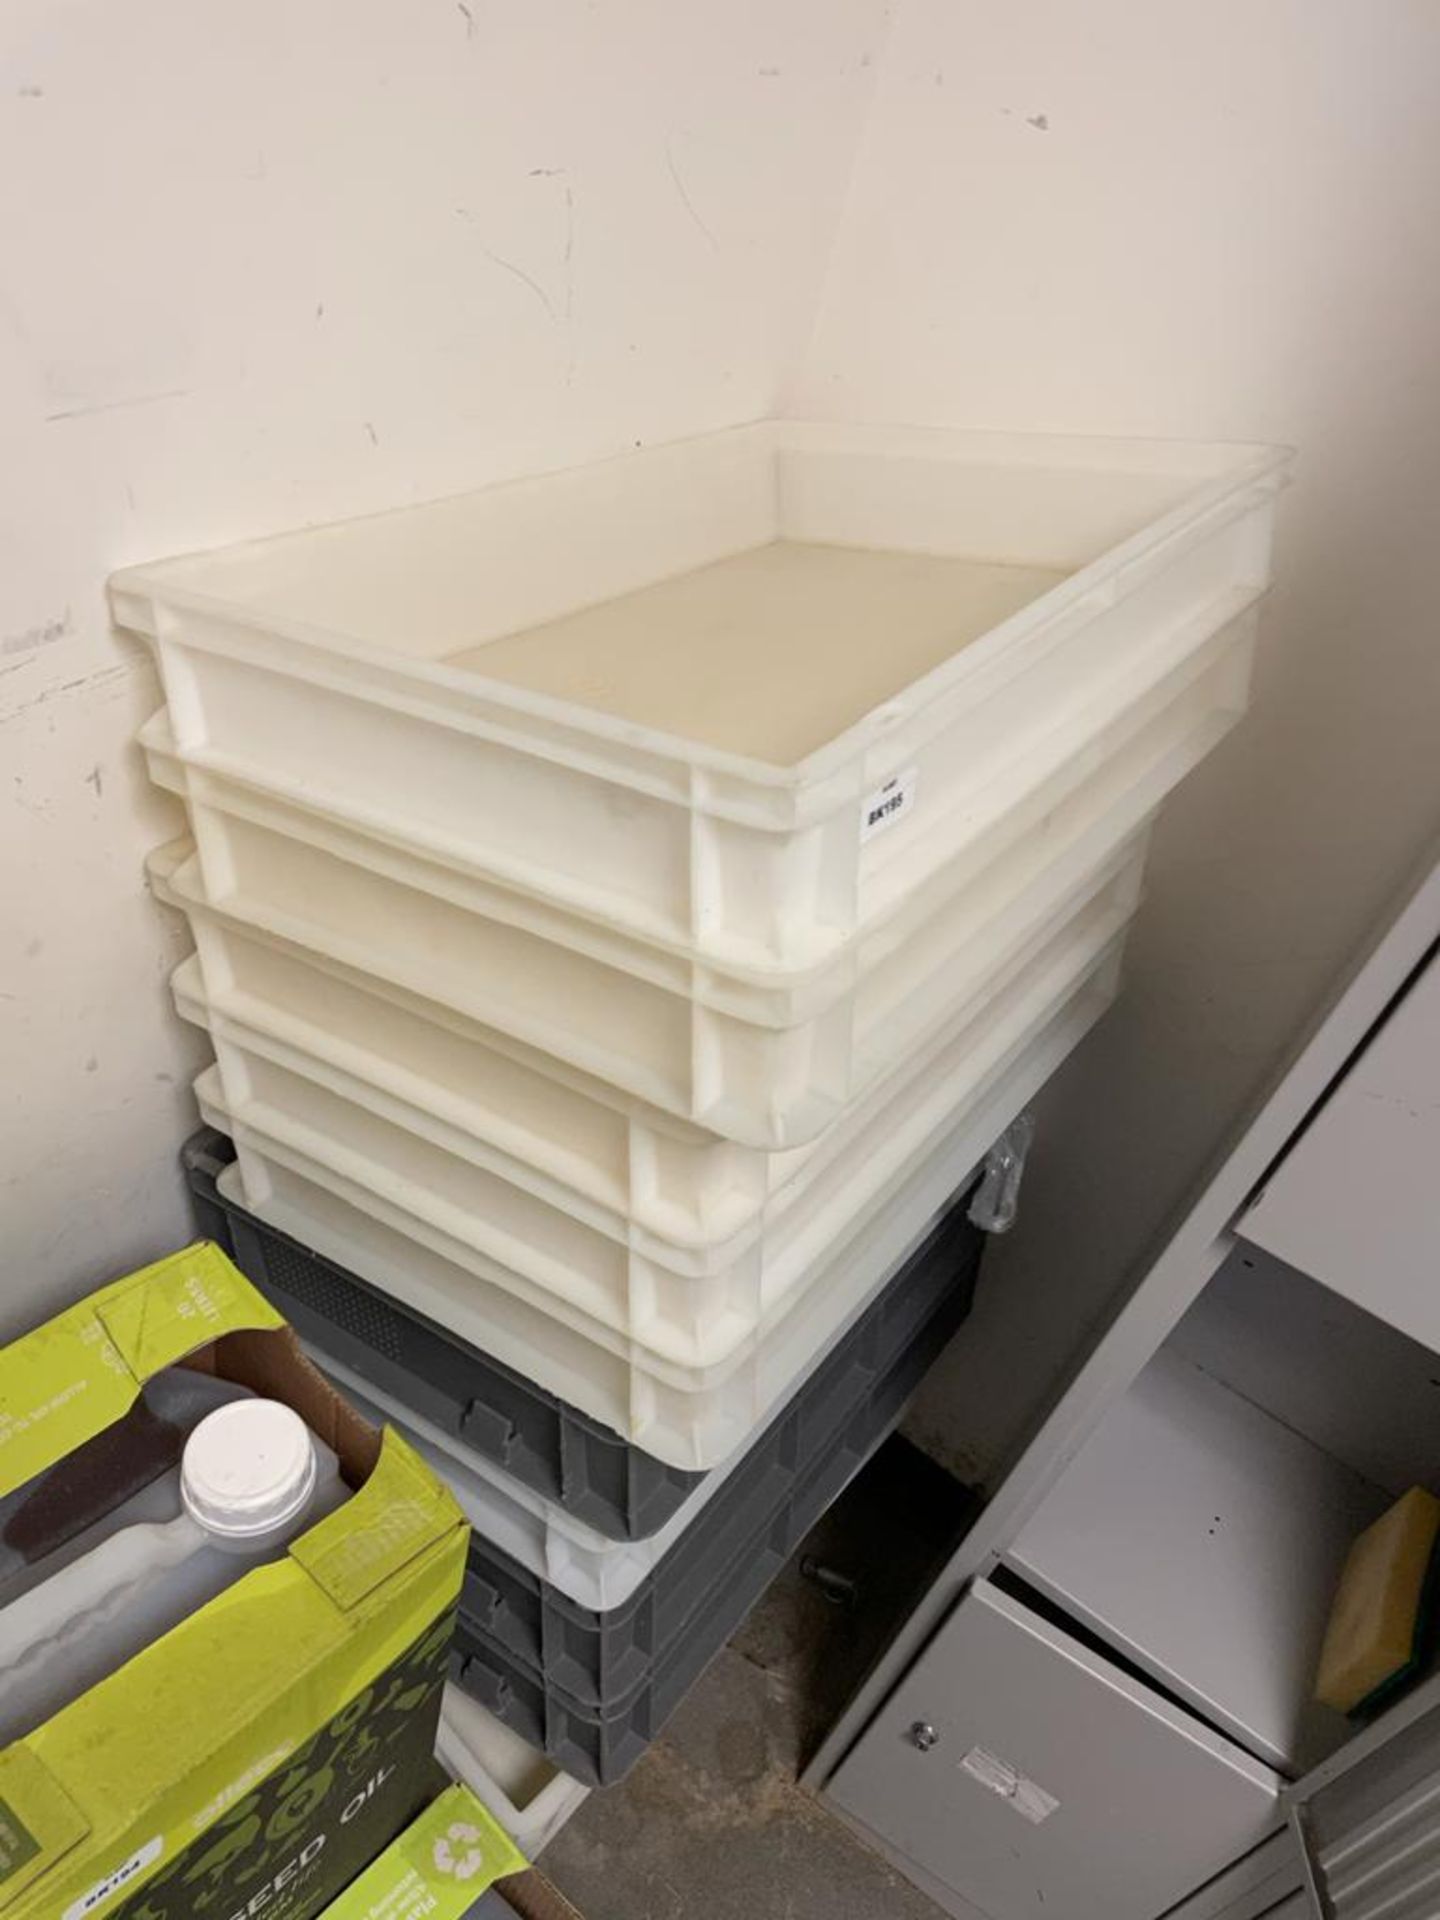 13 x Plastic Food Tray Containers - Ref: BK195 - CL686 - Location: Altrincham WA14This lot was